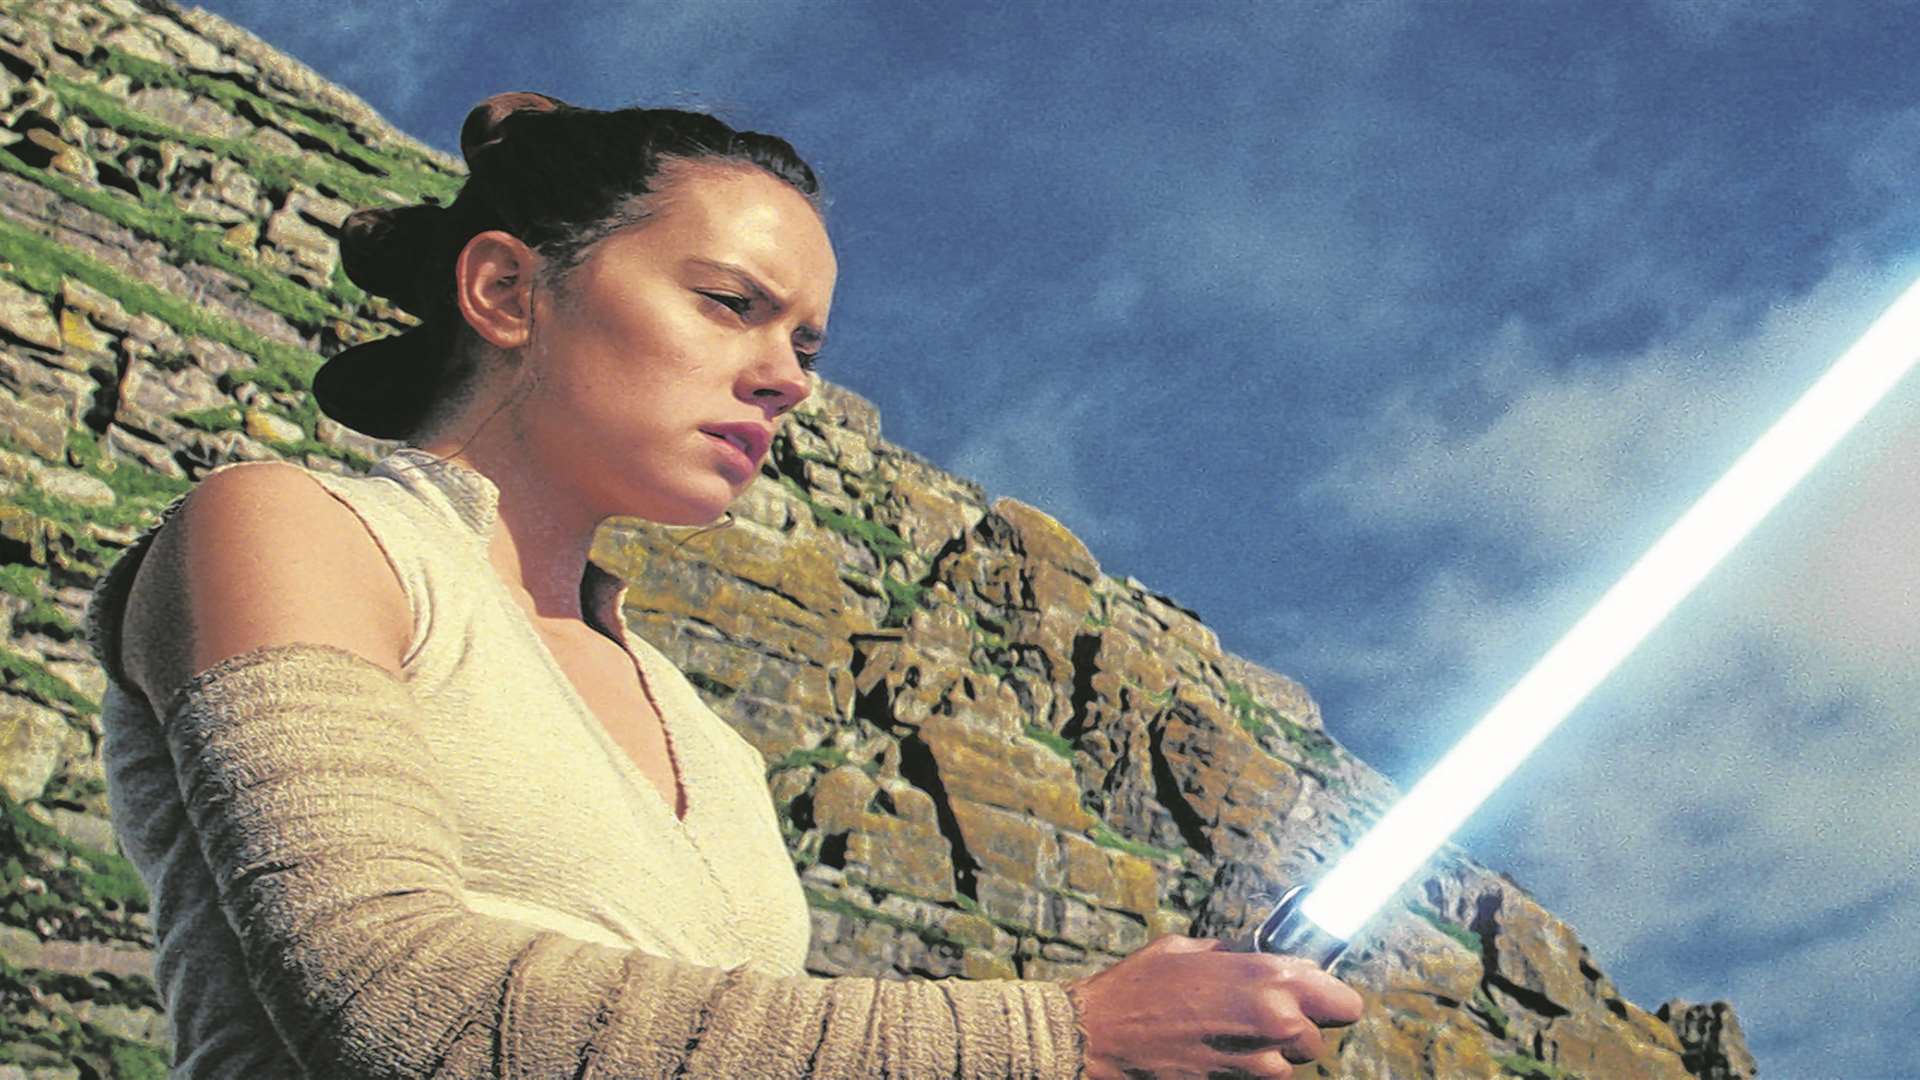 Daisy Ridley as Rey in Star Wars Episode VIII. Picture: Industrial Light & Magic/Lucasfilm Ltd